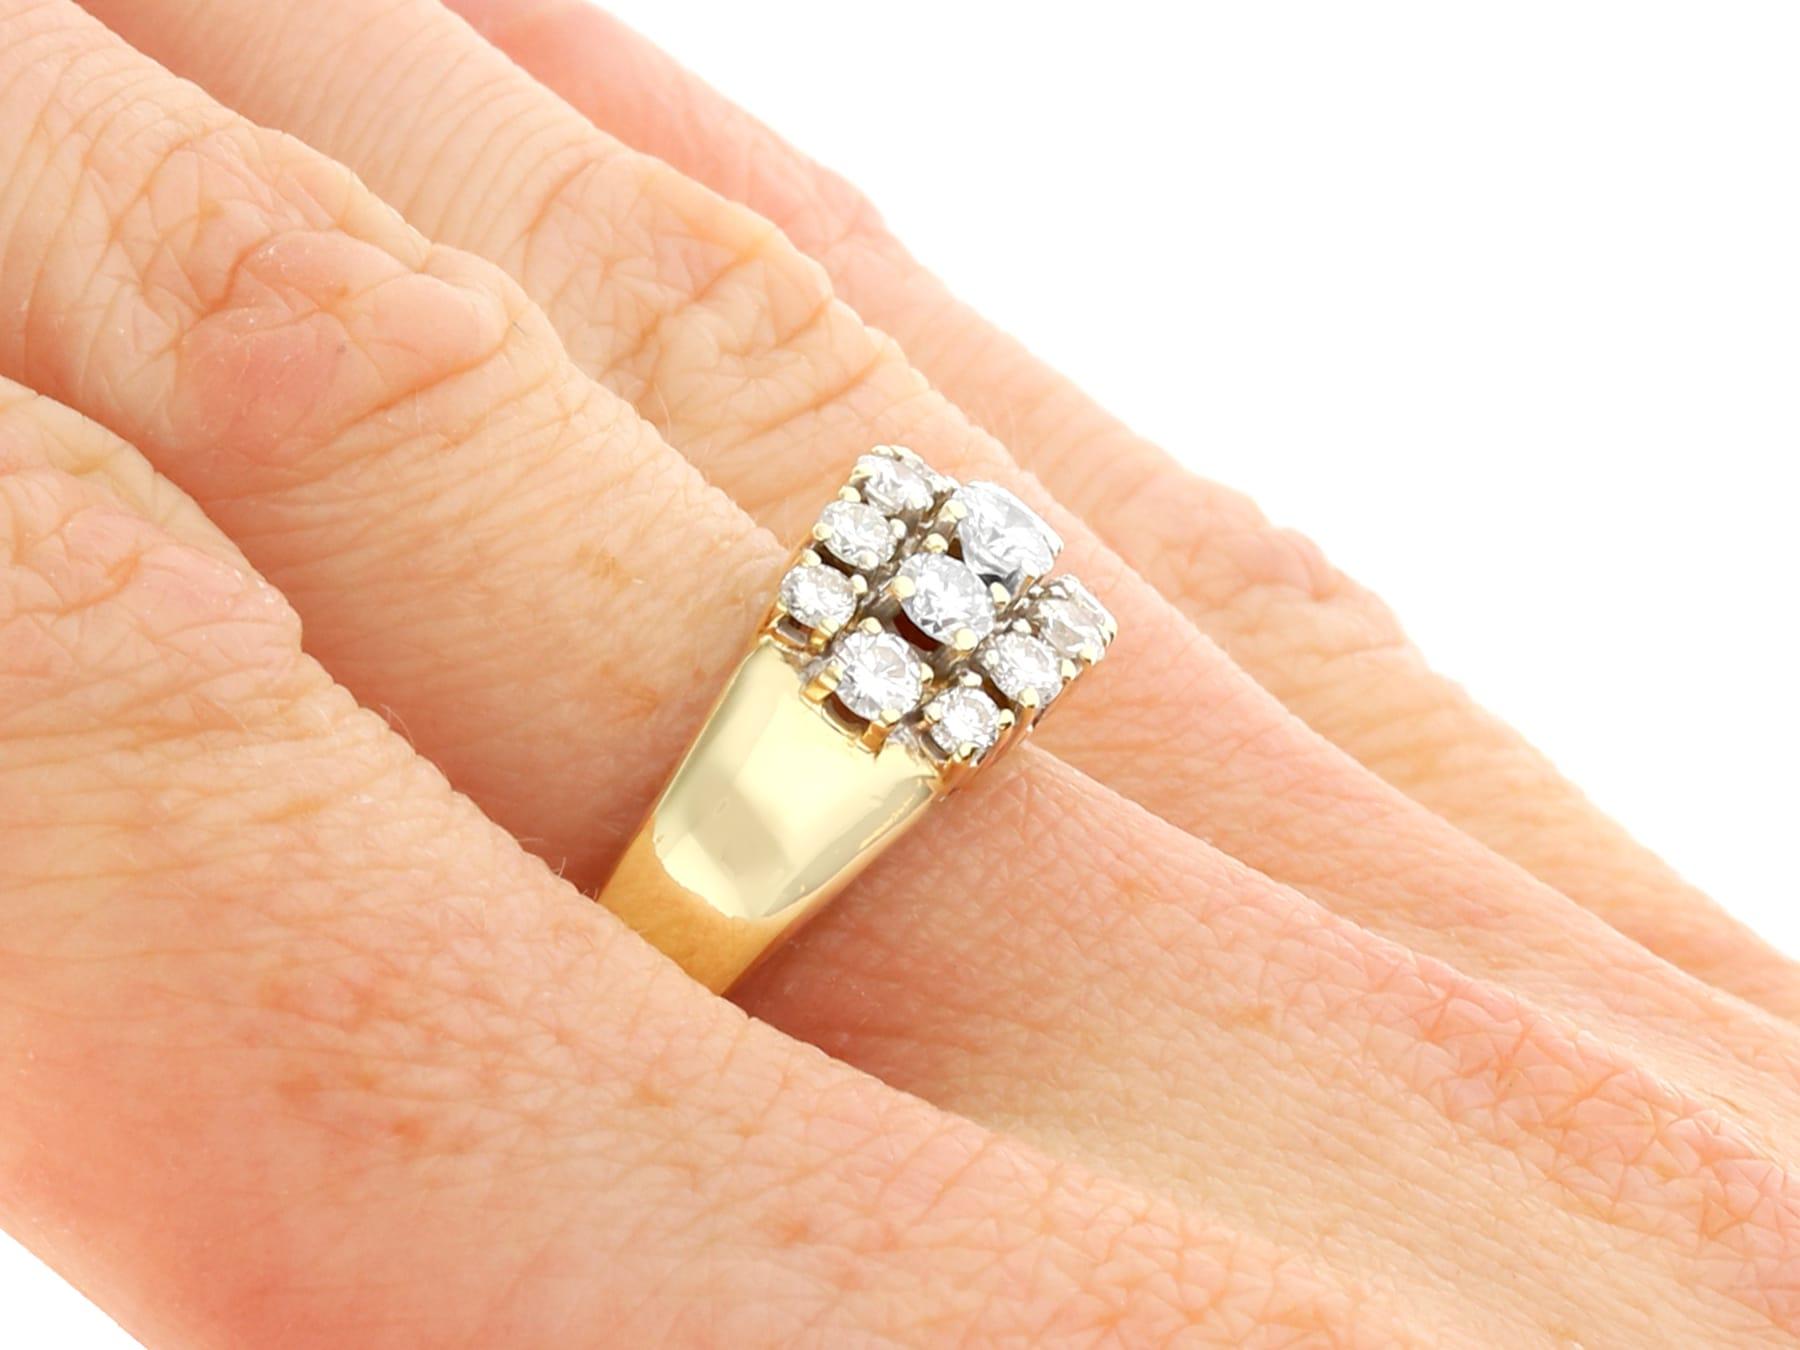 Vintage 1.56 Carat Diamond and 14k Yellow Gold Dress Ring Circa 1960 For Sale 3